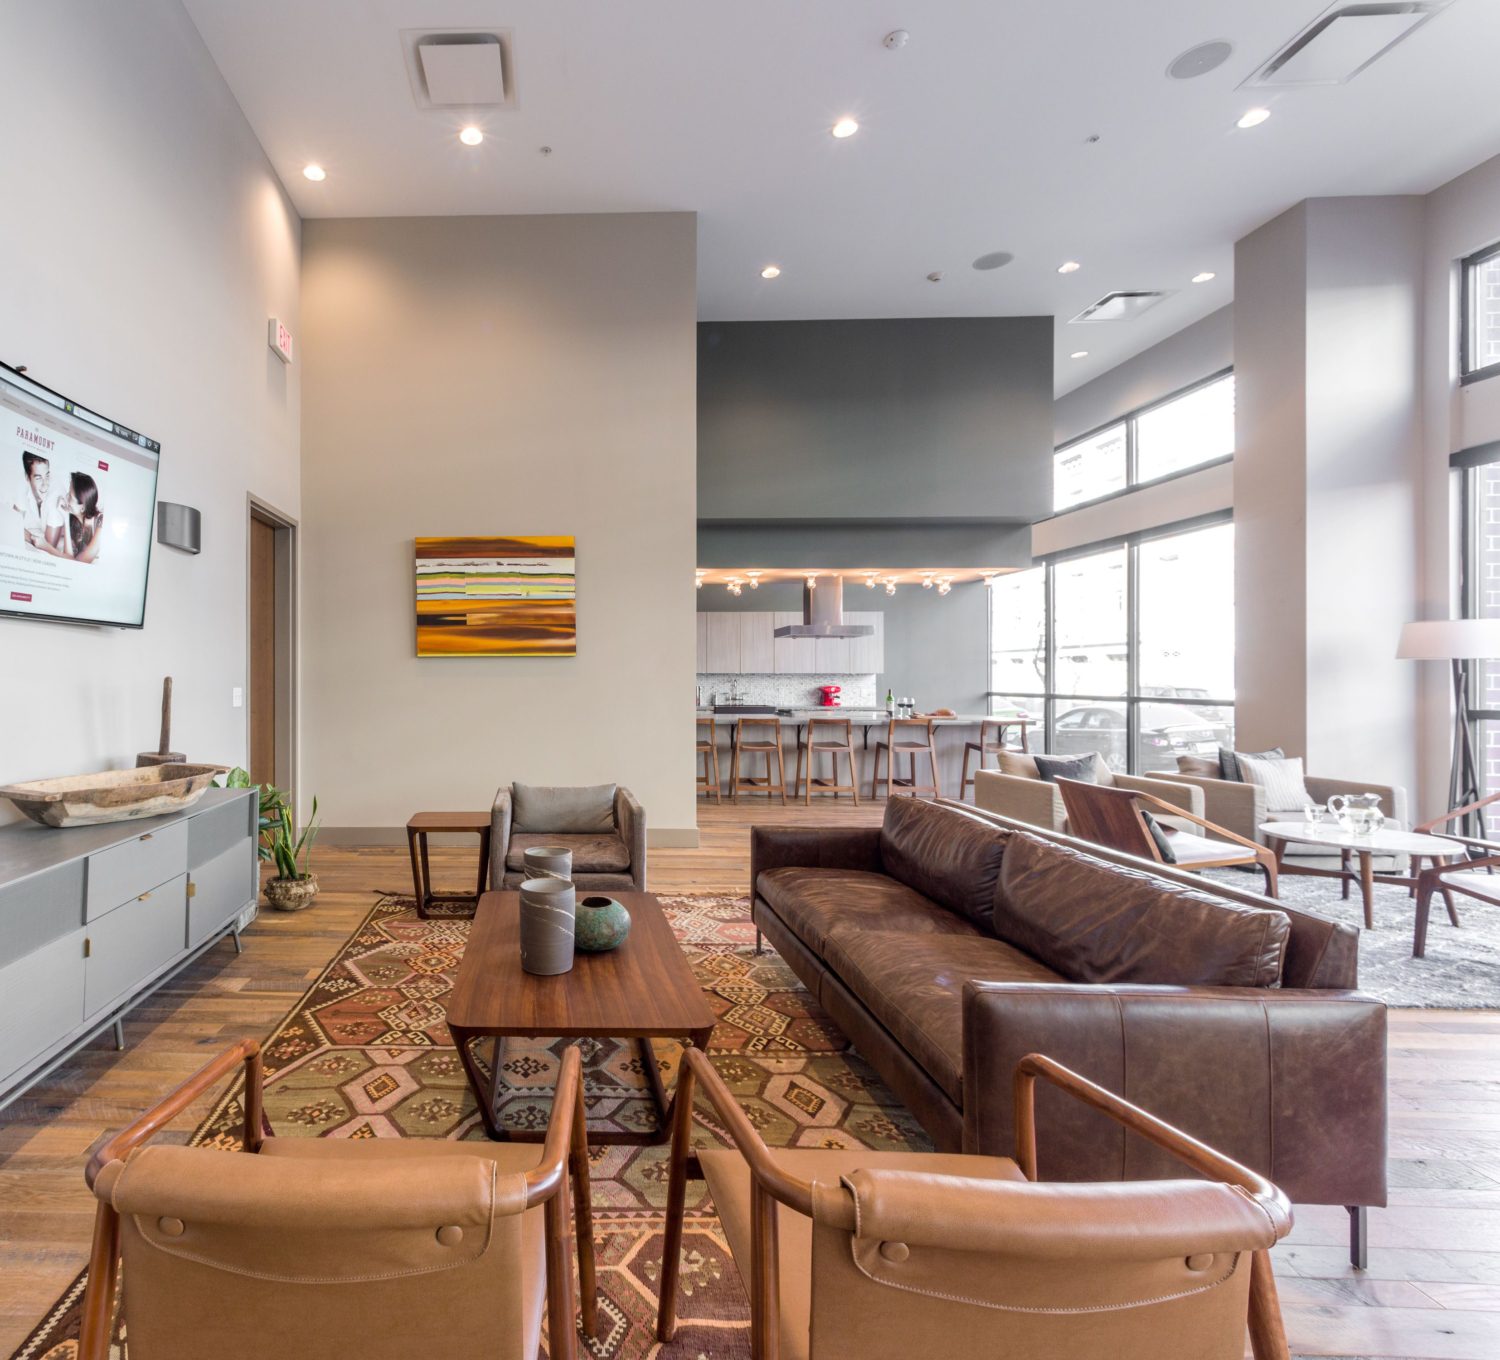 Paramount clubhouse with large TV and stylish seating